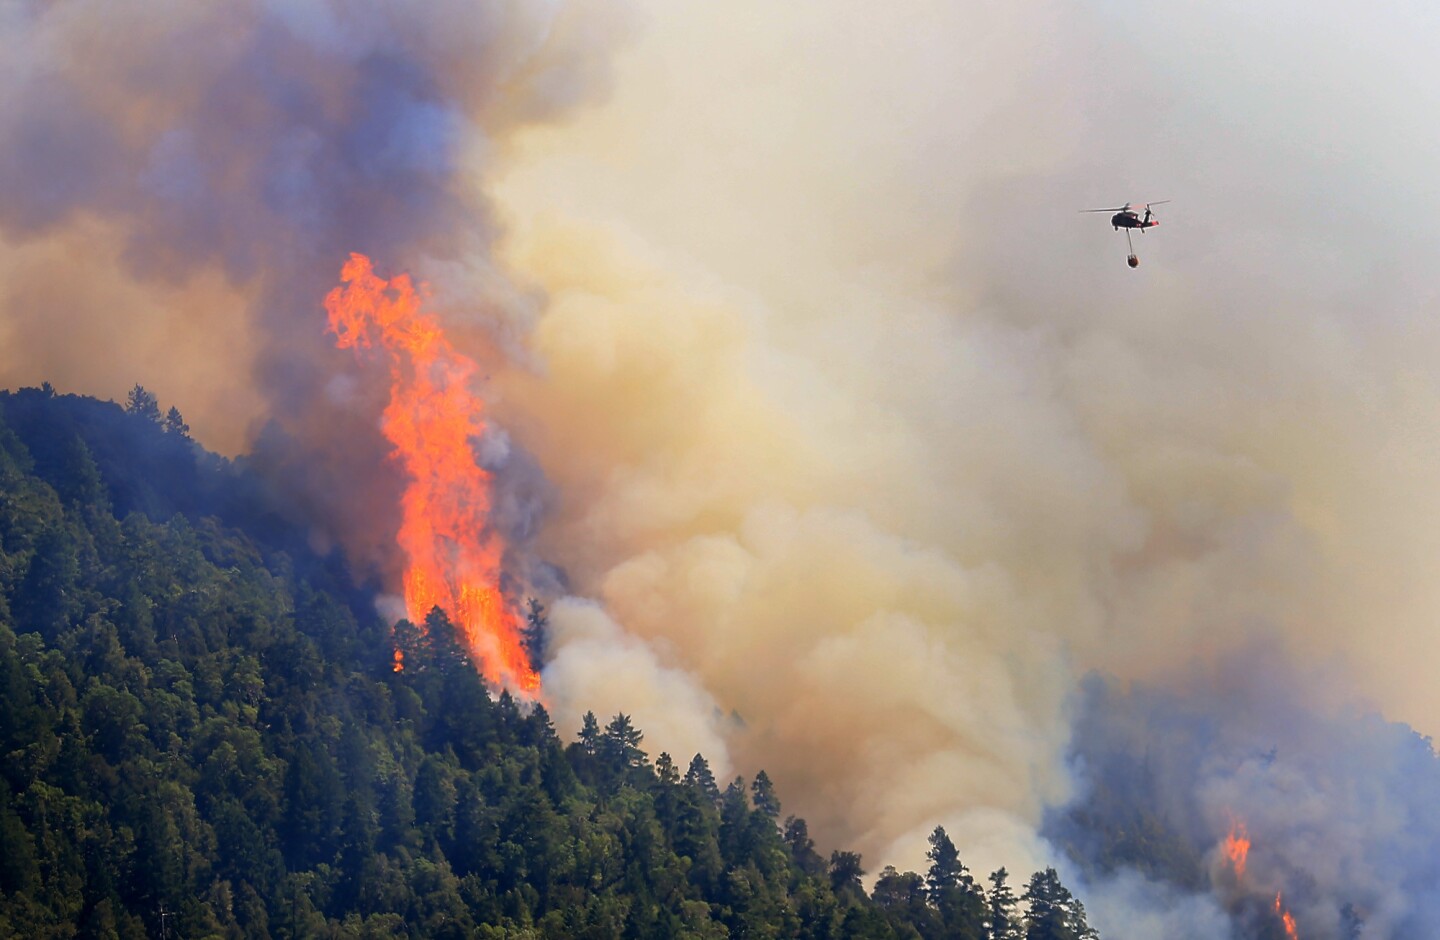 An Air National Guard helicopter moves in to make a water drop on the Lodge fire in Northern California. The fire was burning between Leggett and Laytonville in Mendocino County.